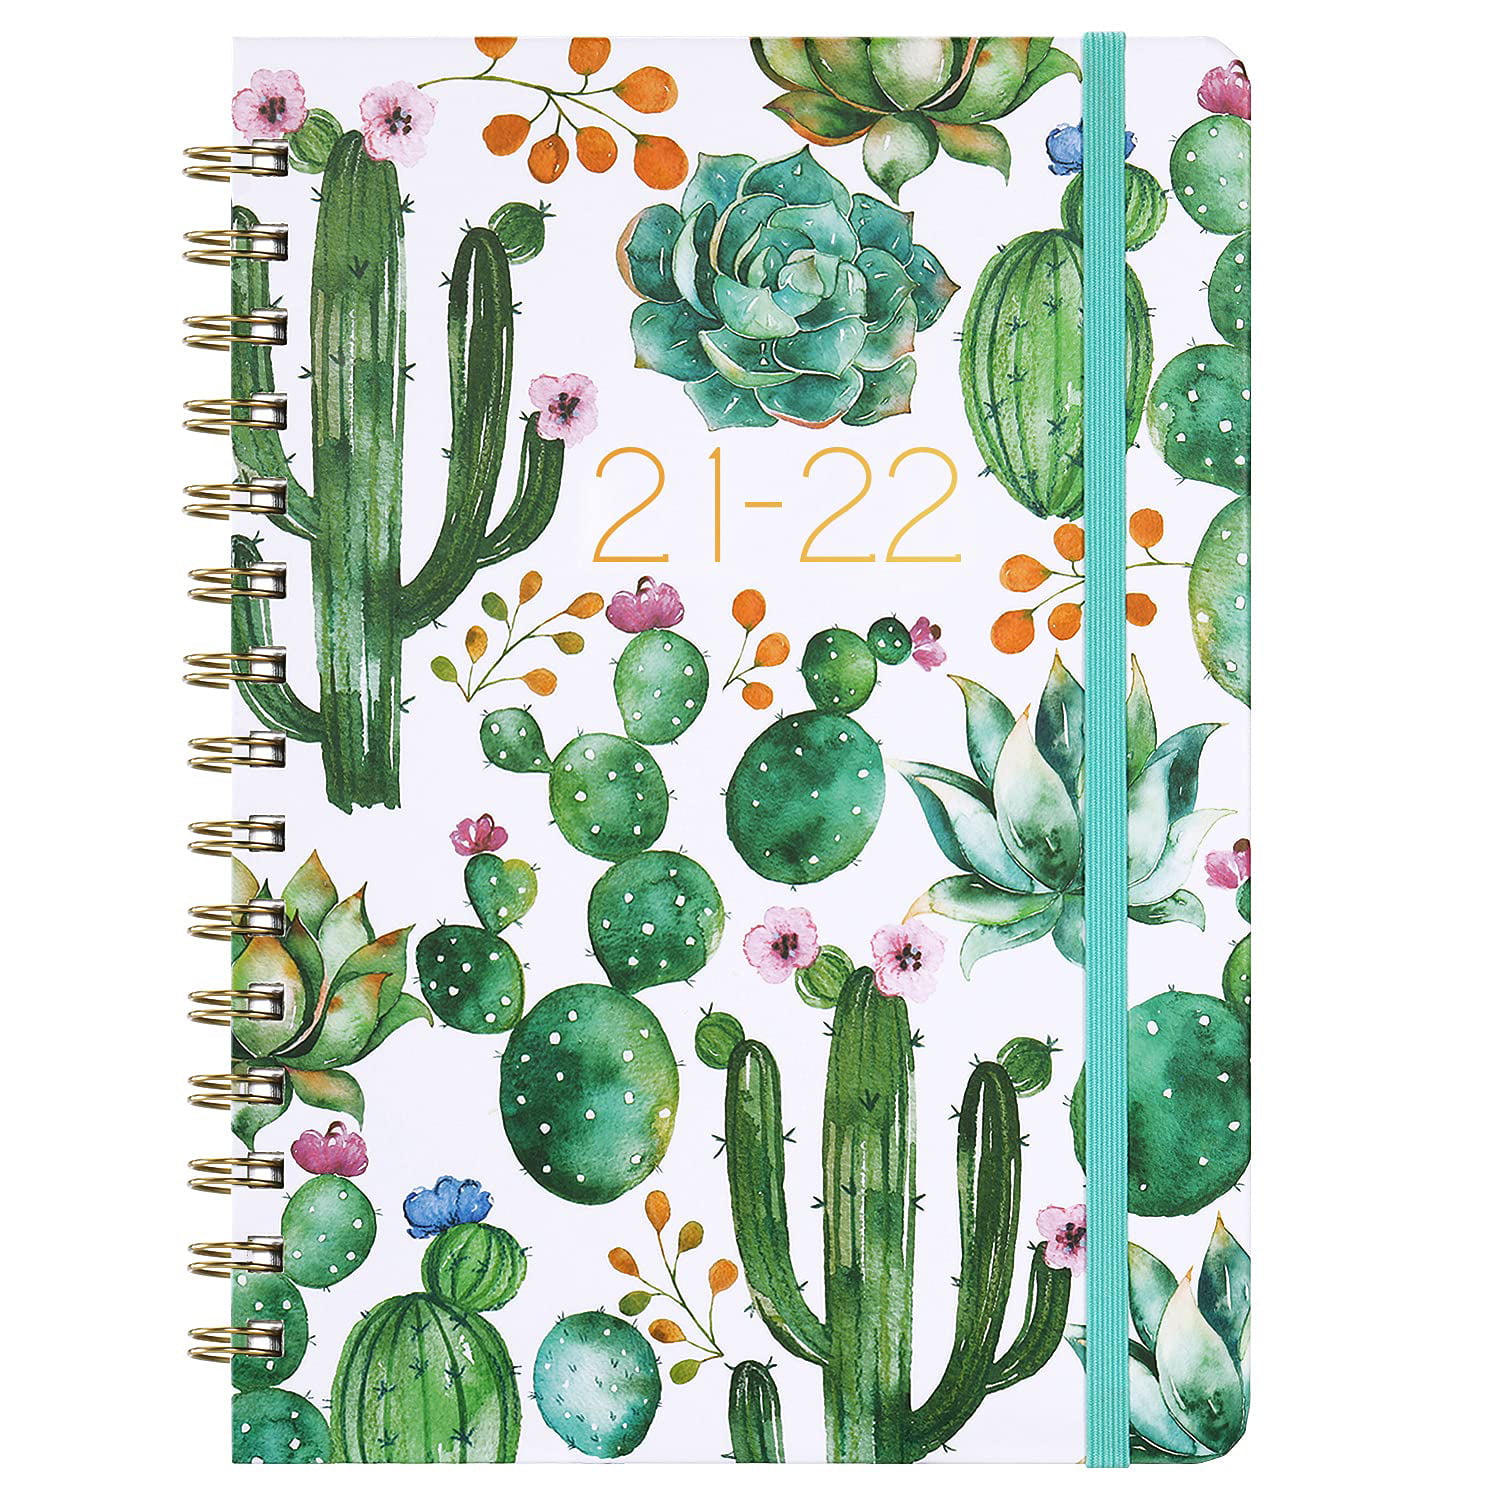 2022 Planner 2022 Planner Weekly and Monthly Jan 2022 Hard Cover Planner with Elastic Closure Inner Pocket 8.5 x 6.4 12 Monthly Tabs Dec 2022 